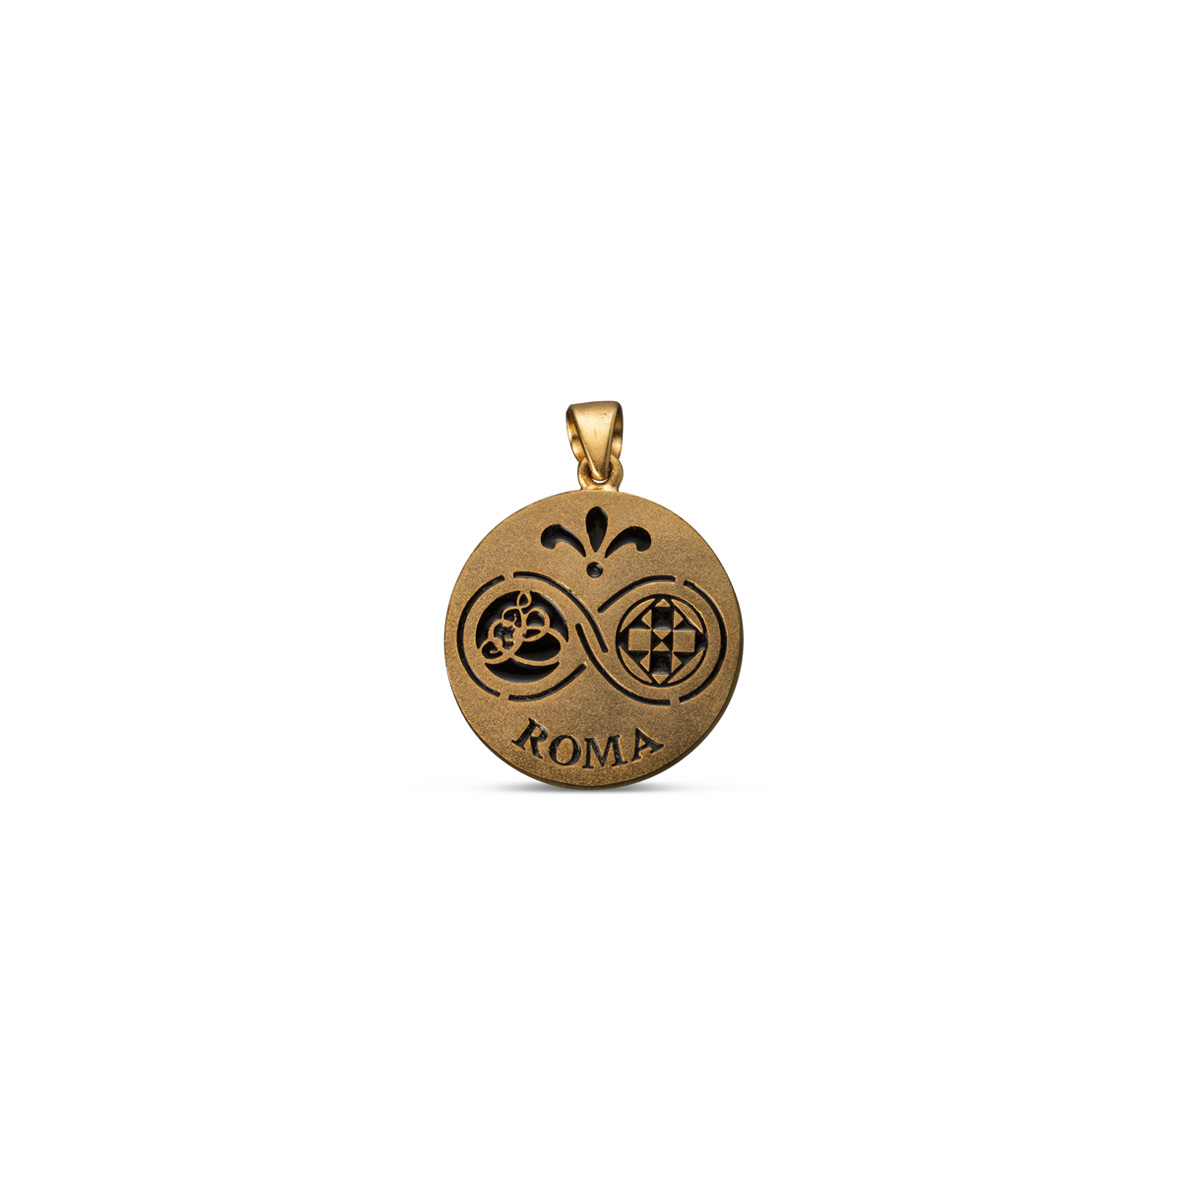 Pendant with bronze theatrical mask